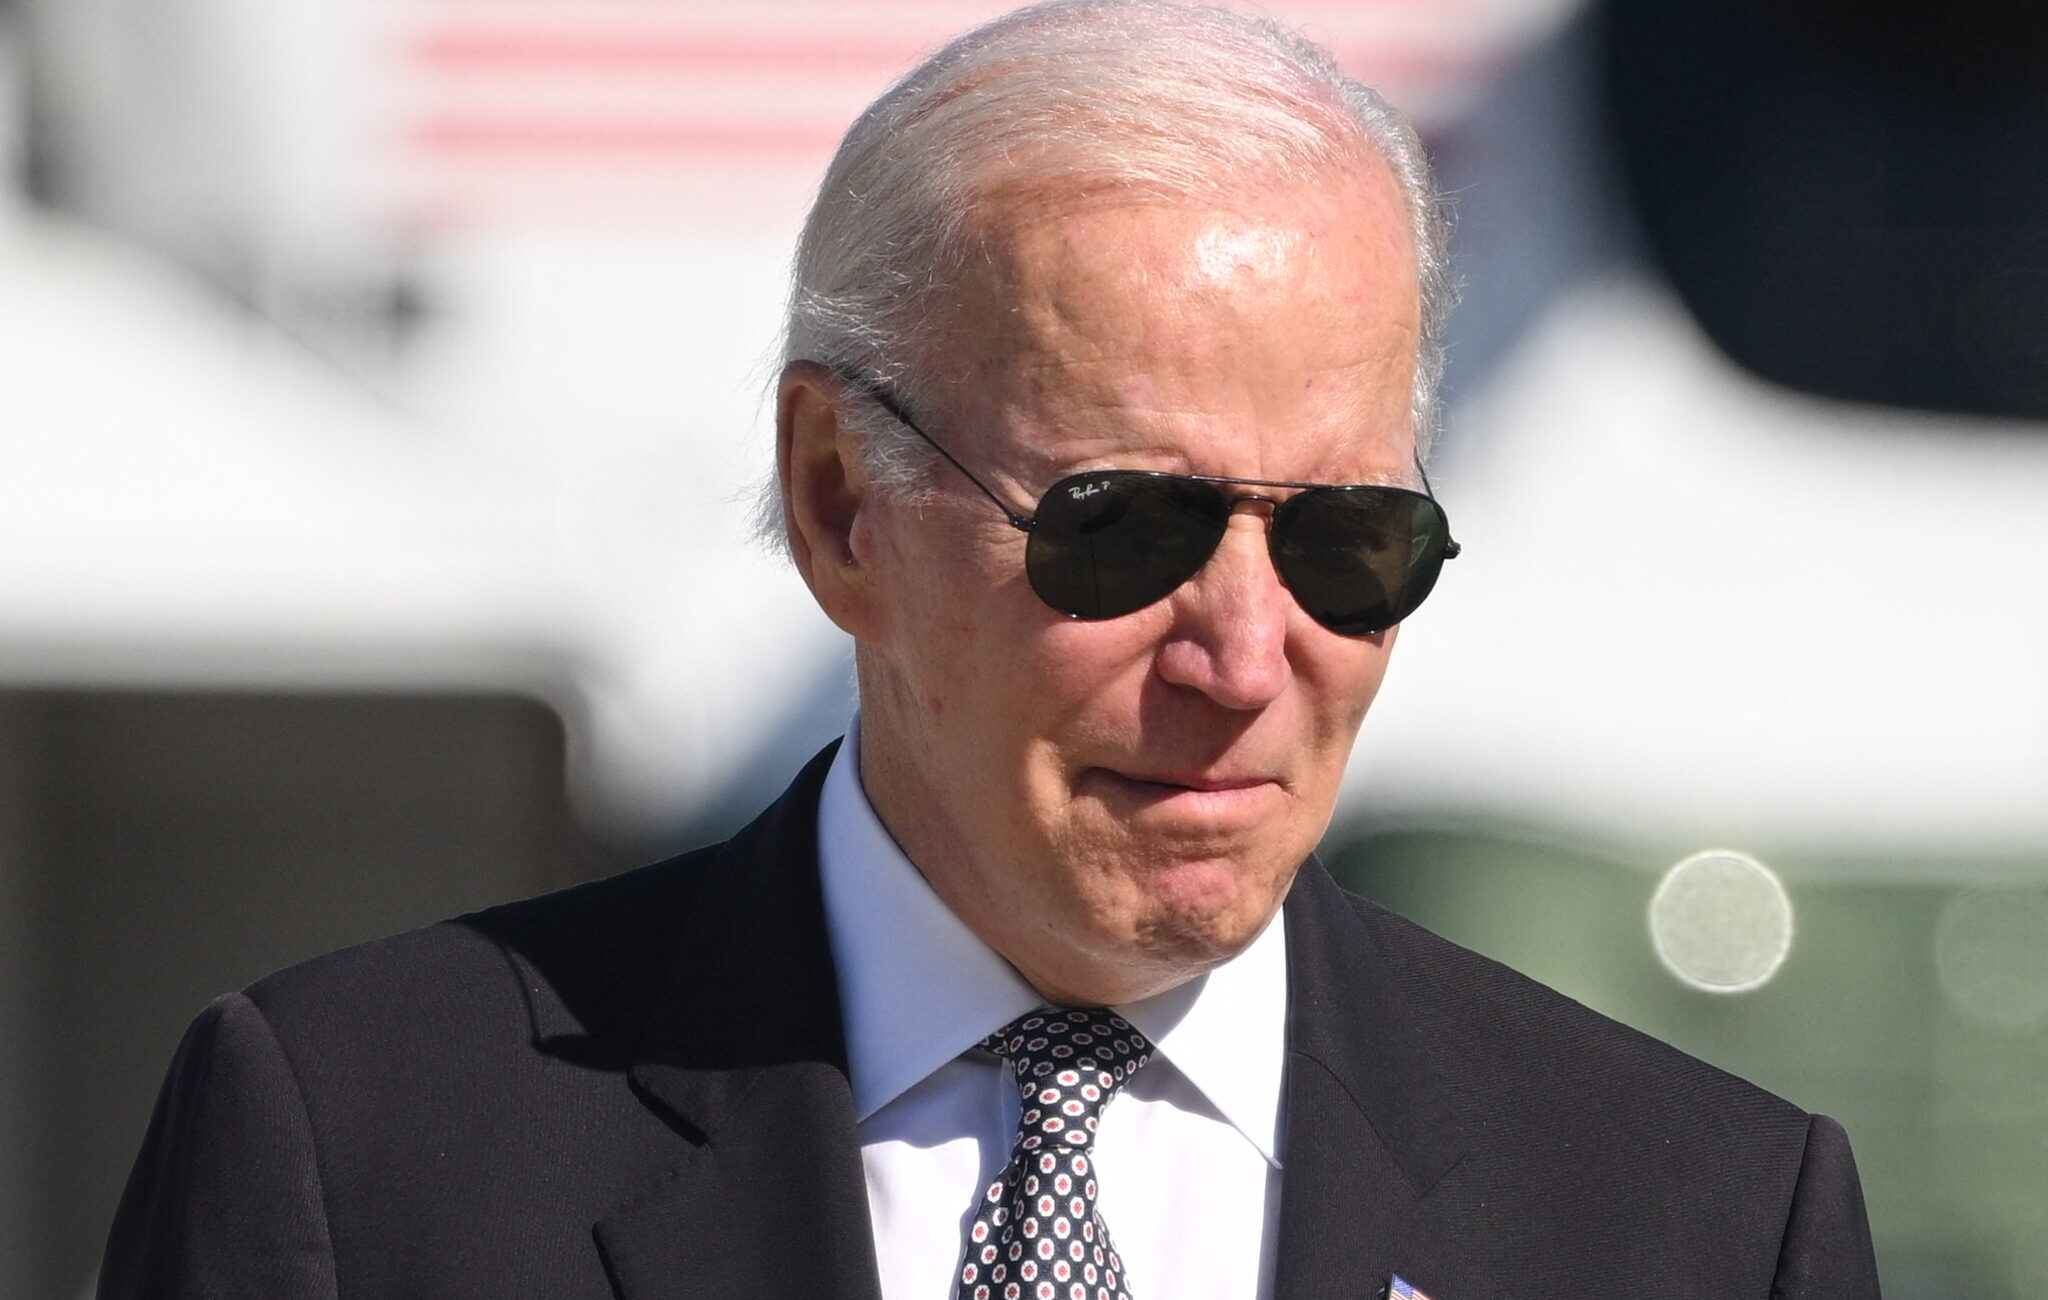 Biden Says World Faces ‘Prospect of Armageddon’ Over Putin’s Alleged Threat to Use Nuclear Weapons